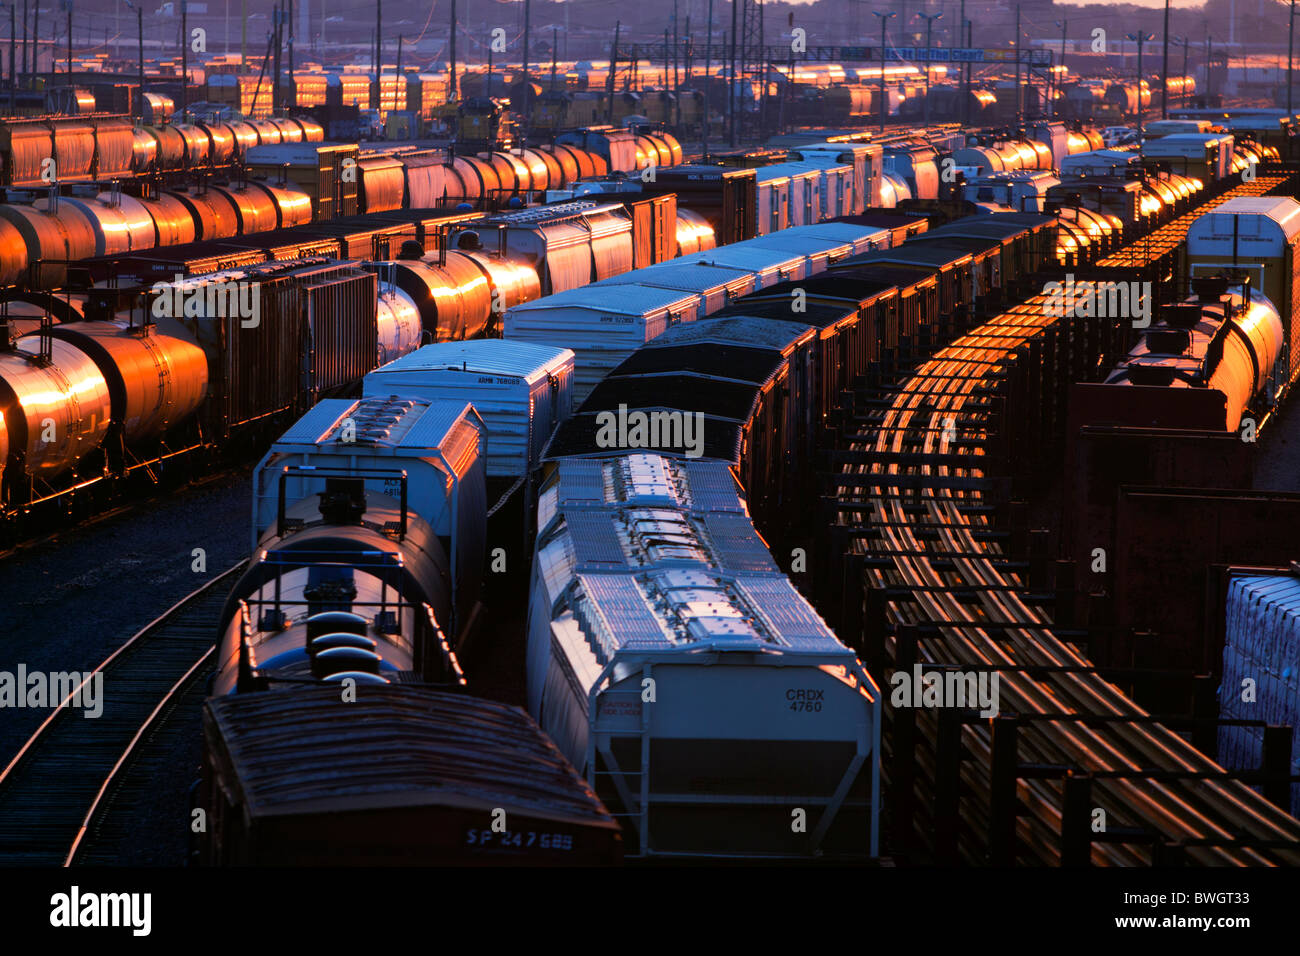 Lots of freight cars reflect the late evening sun in a railroad yard in Chicago, IL. Stock Photo